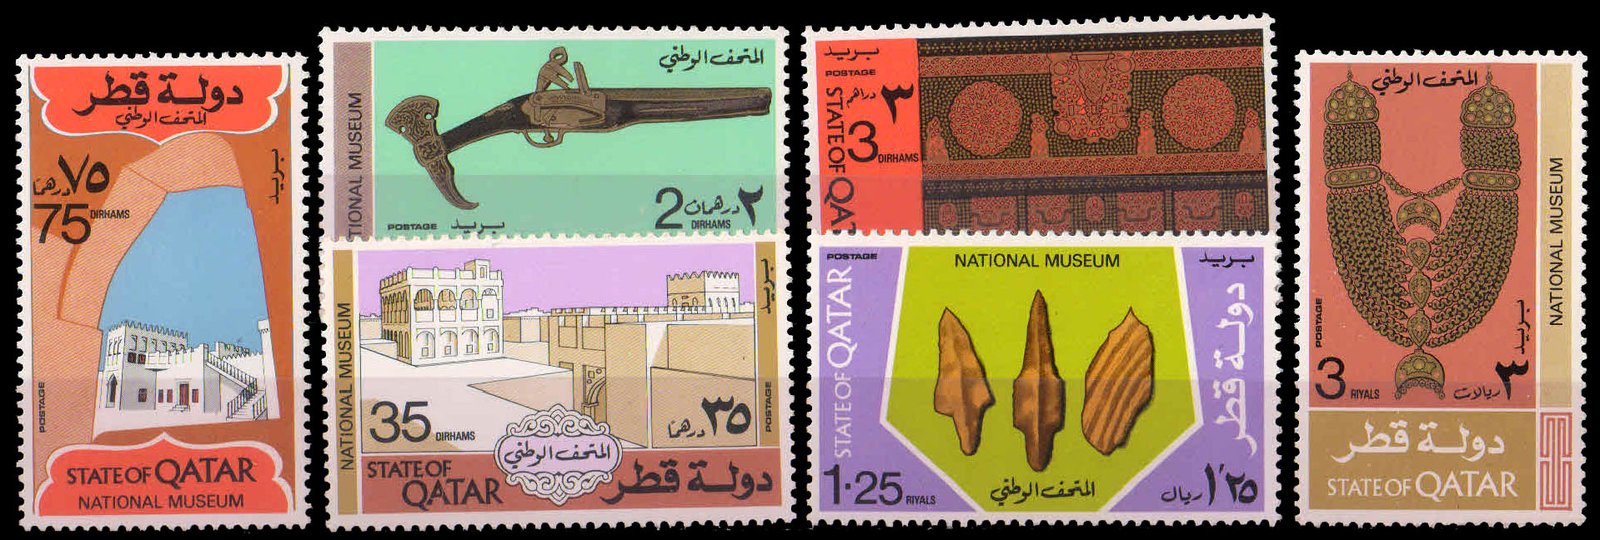 QATAR 1975-Opening of National Museum, Pistol, Mosaic, Buildings, Gold Necklace, Set of 6, MNH, Cat £ 45-S.G. 543-548